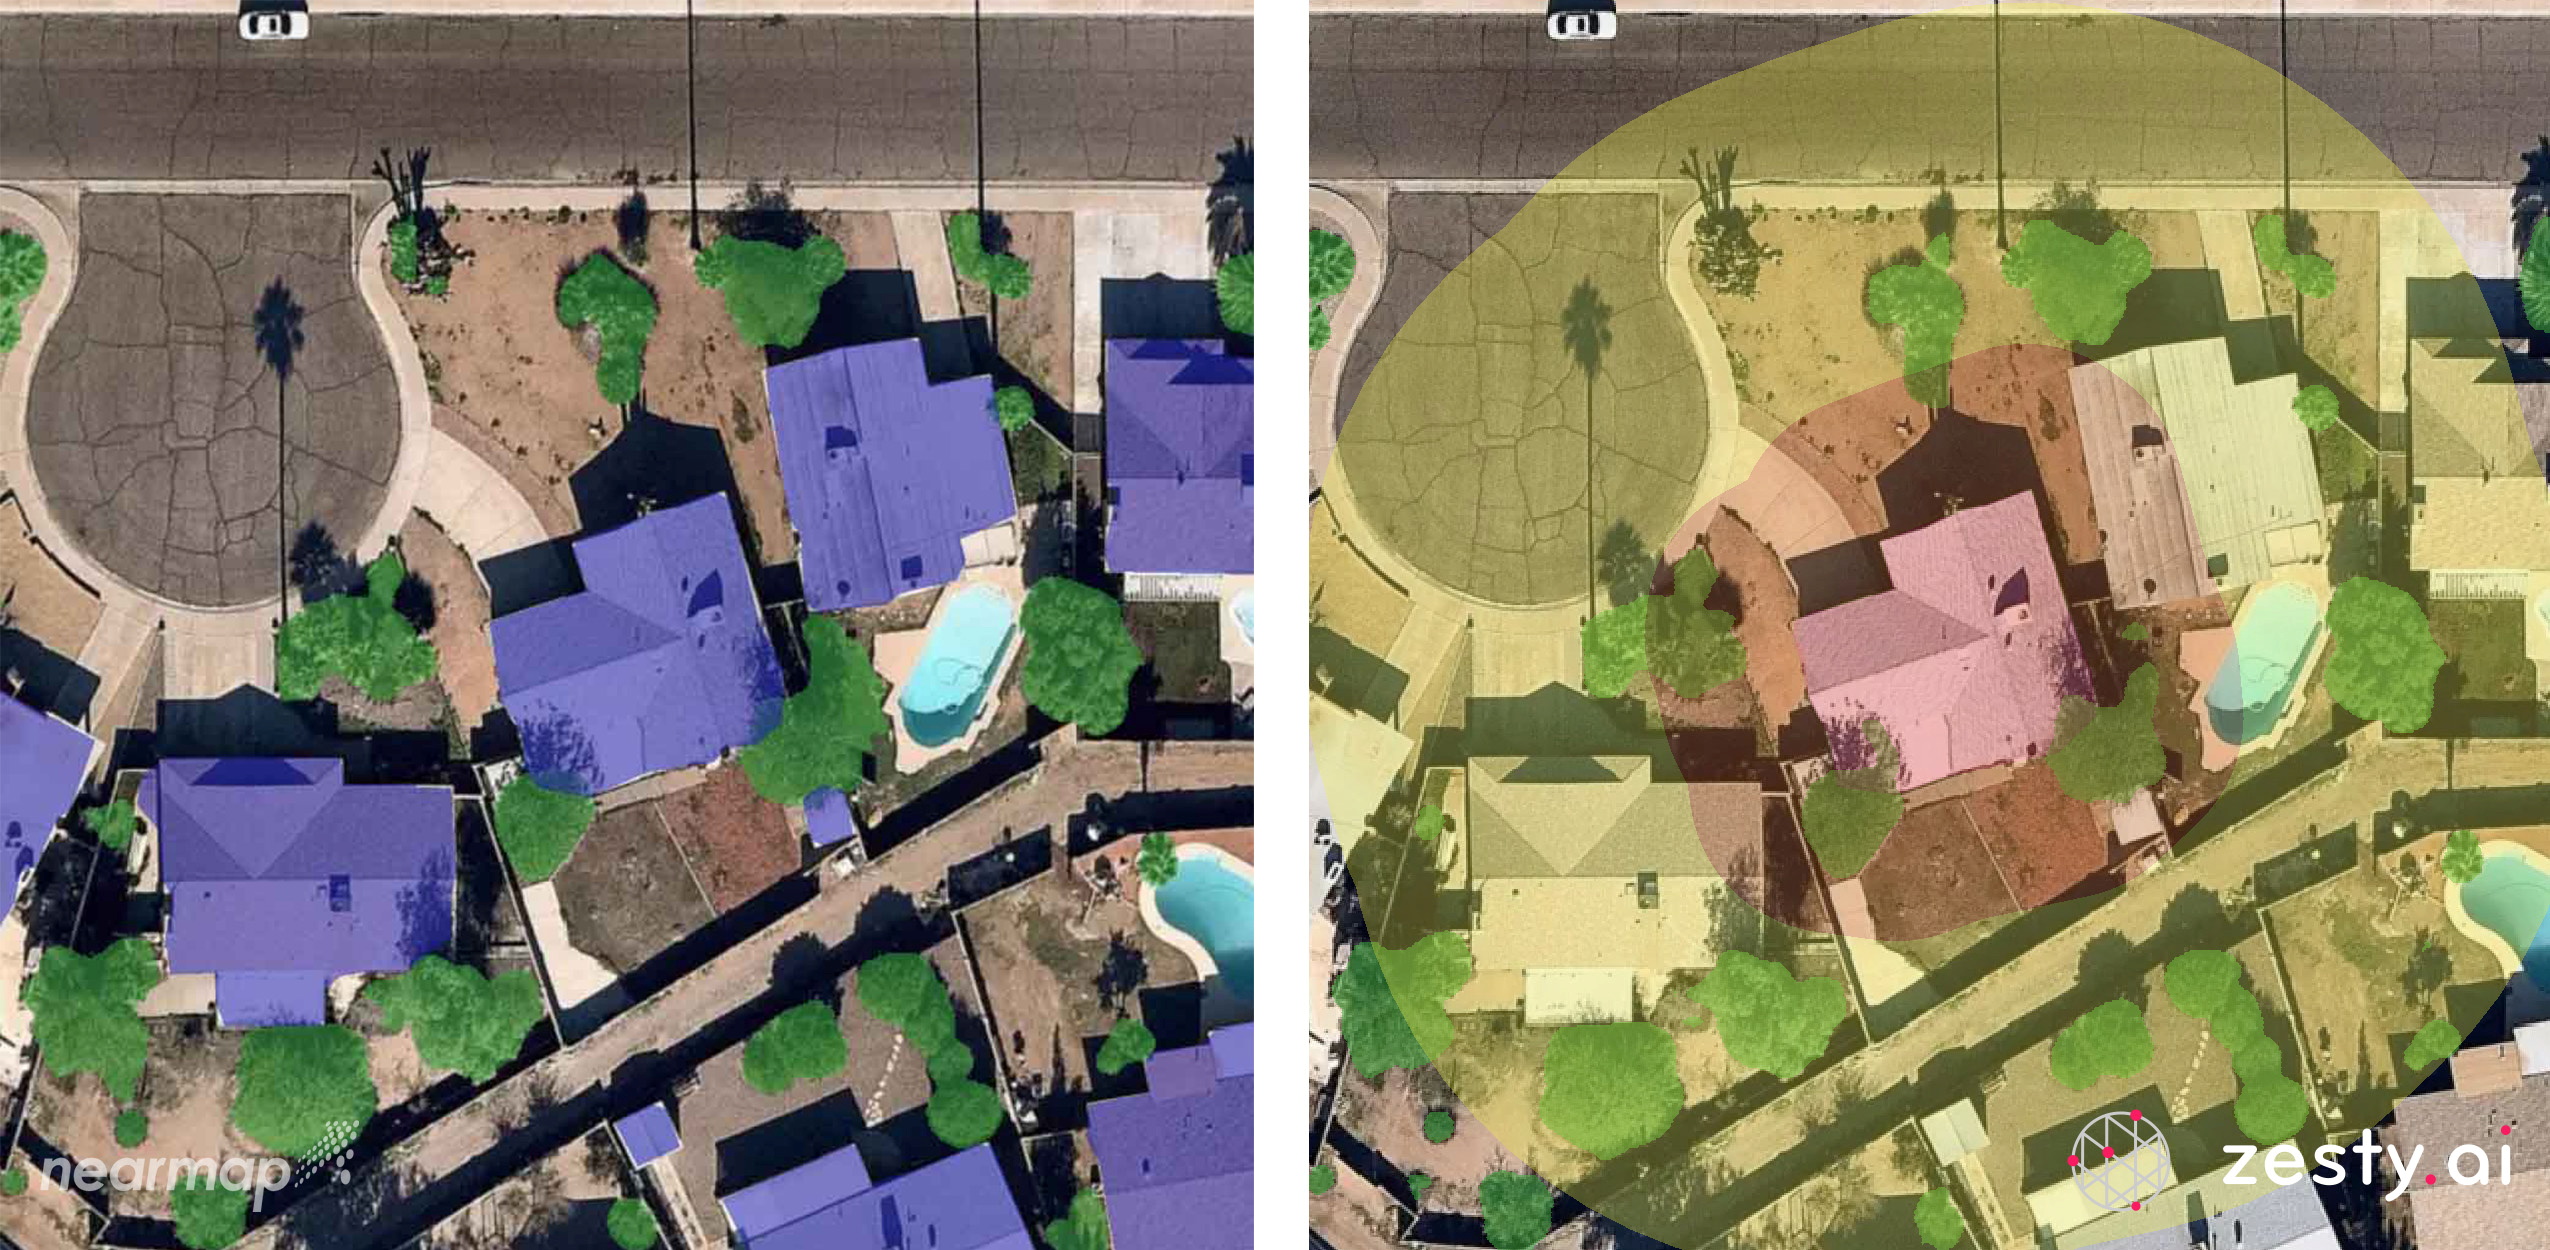 Handout combination image supplied shows Zesty.ai compute the fraction of an area occupied by combustible vegetation and if buildings are present, in California, U.S., in this undated 2020 image. Zesty.ai and Nearmap/Handout via REUTERS   